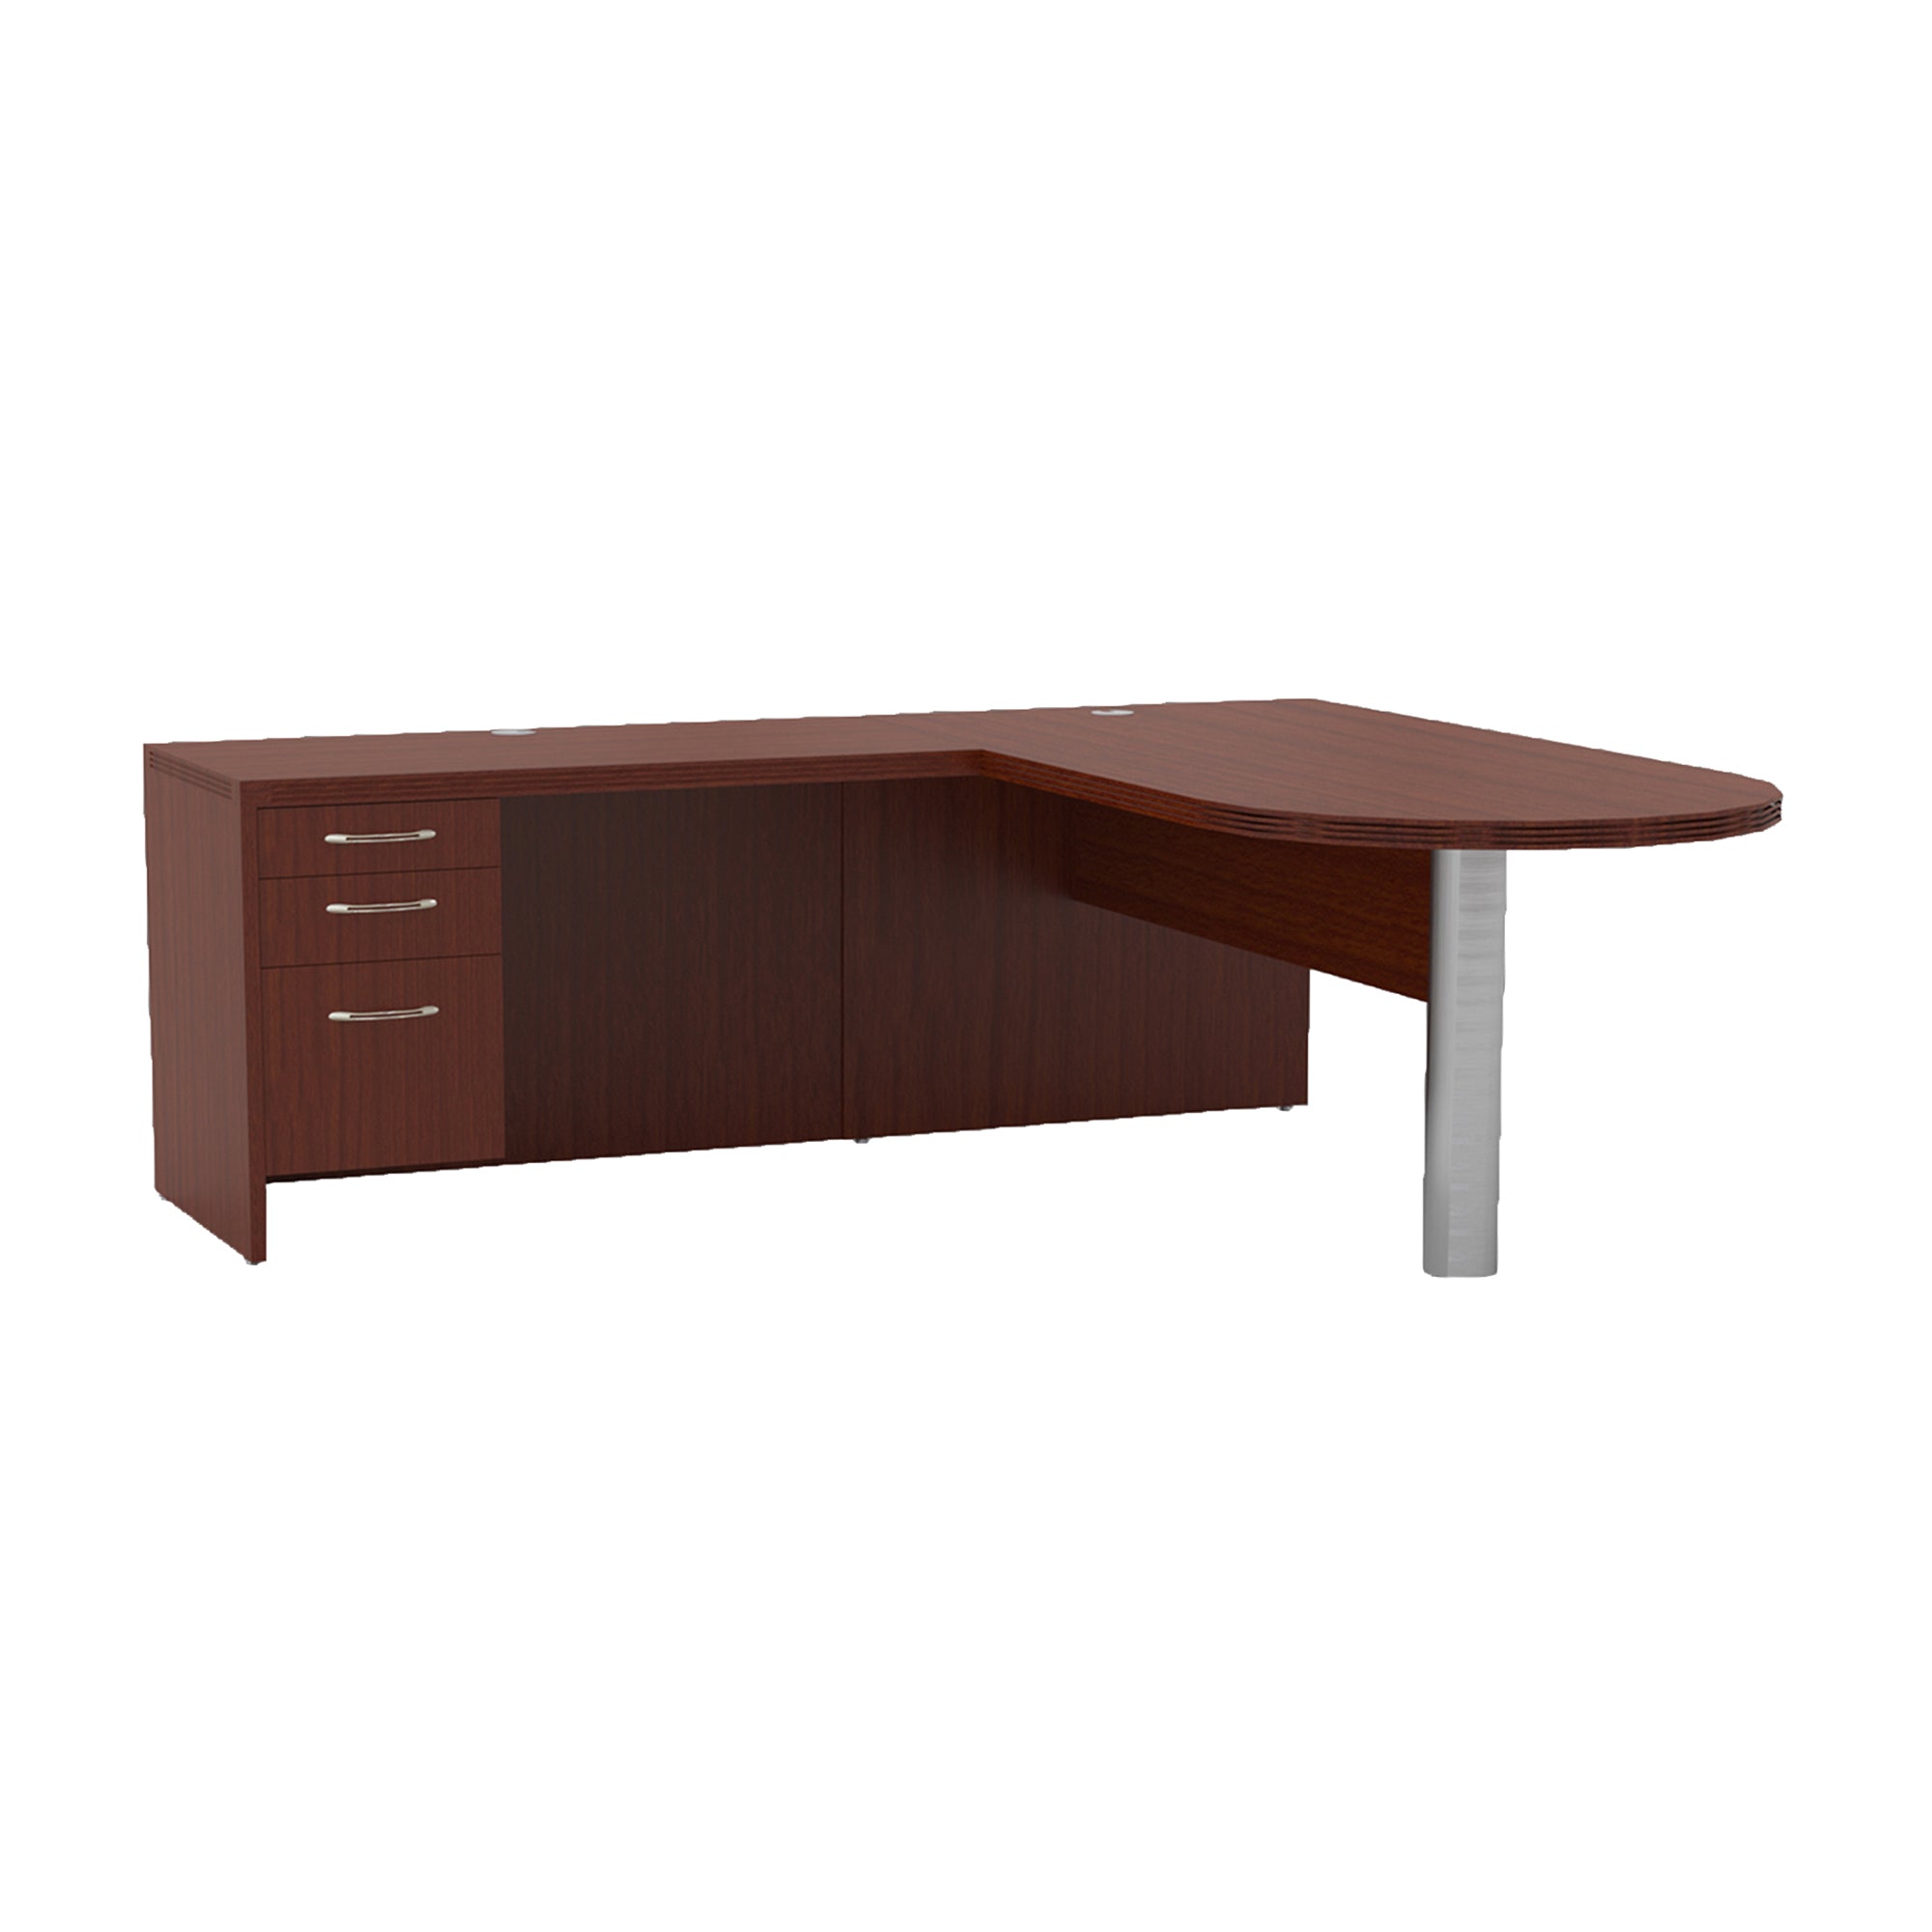 L Shaped Desk With Pedestal And Peninsula In Cherry Officedesk Com